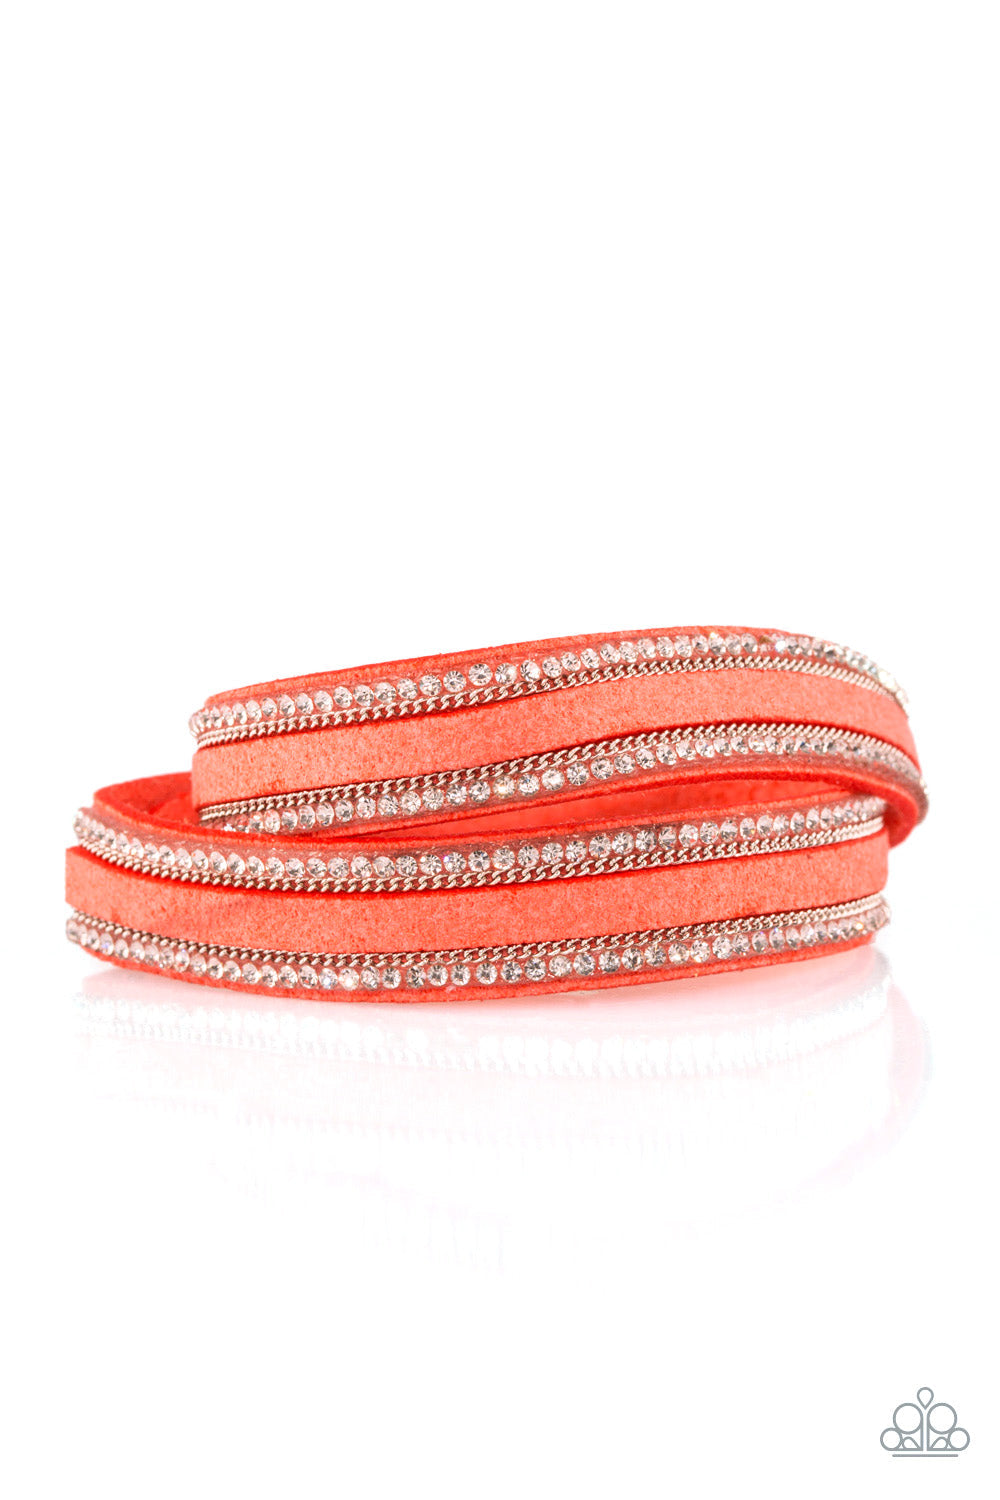 Going For Glam - Orange Suede Wrap - Snap Bracelet - Paparazzi Accessories - An elongated orange suede band is encrusted in rows of glassy white rhinestones and shimmery silver chains. The elongated band double wraps around the wrist for a fierce one-of-a-kind look. Features an adjustable snap closure. Sold as one individual bracelet.